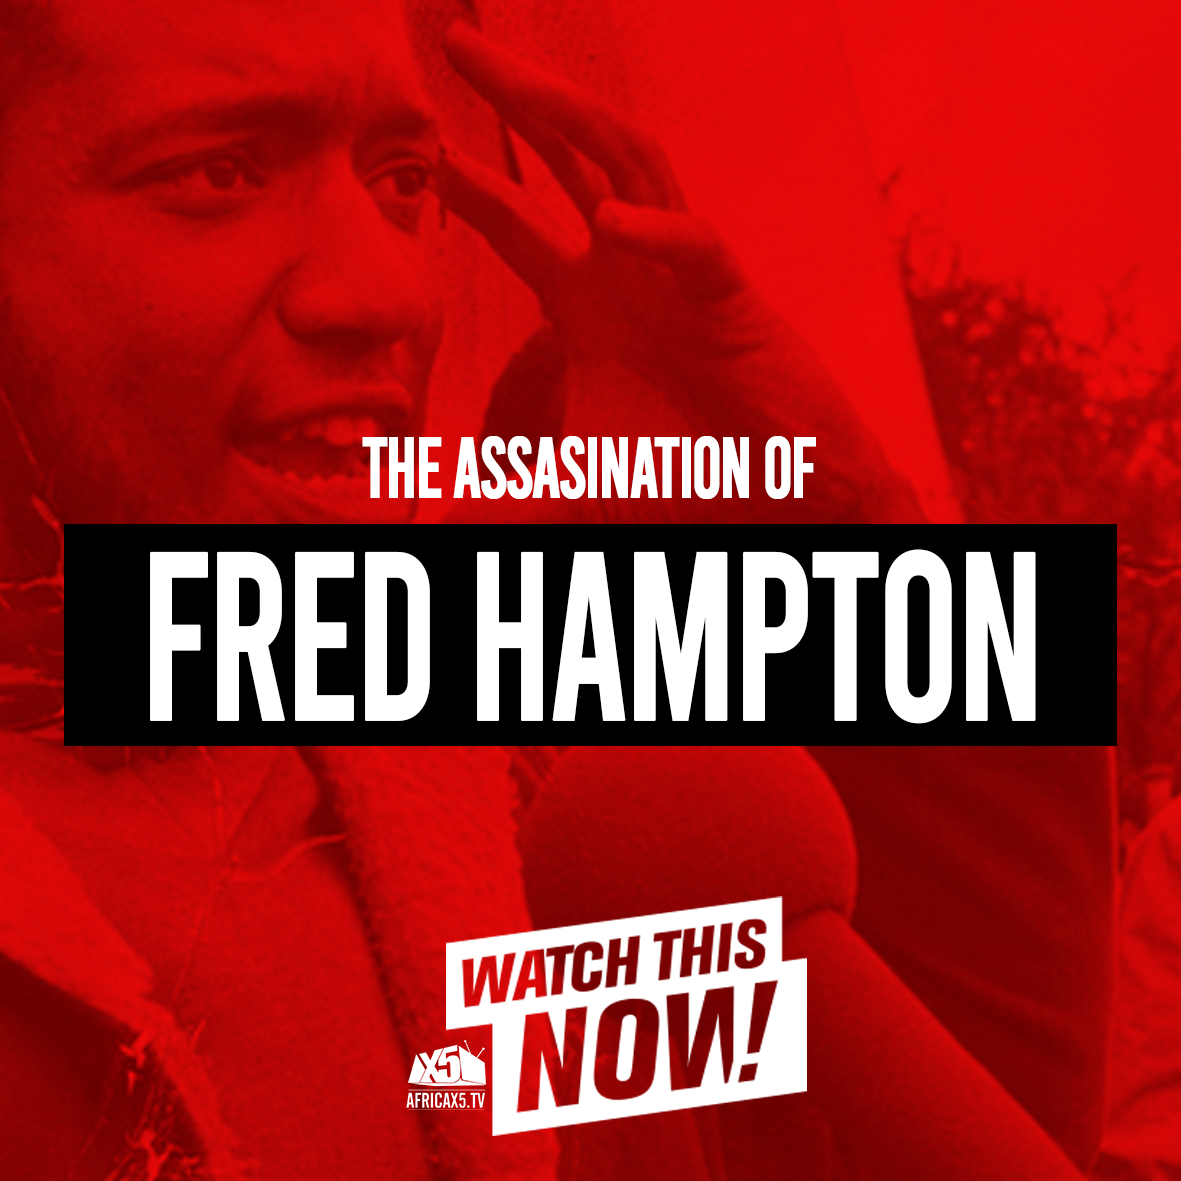 The Assasination of Fred Hampton (Black Panther Movement)